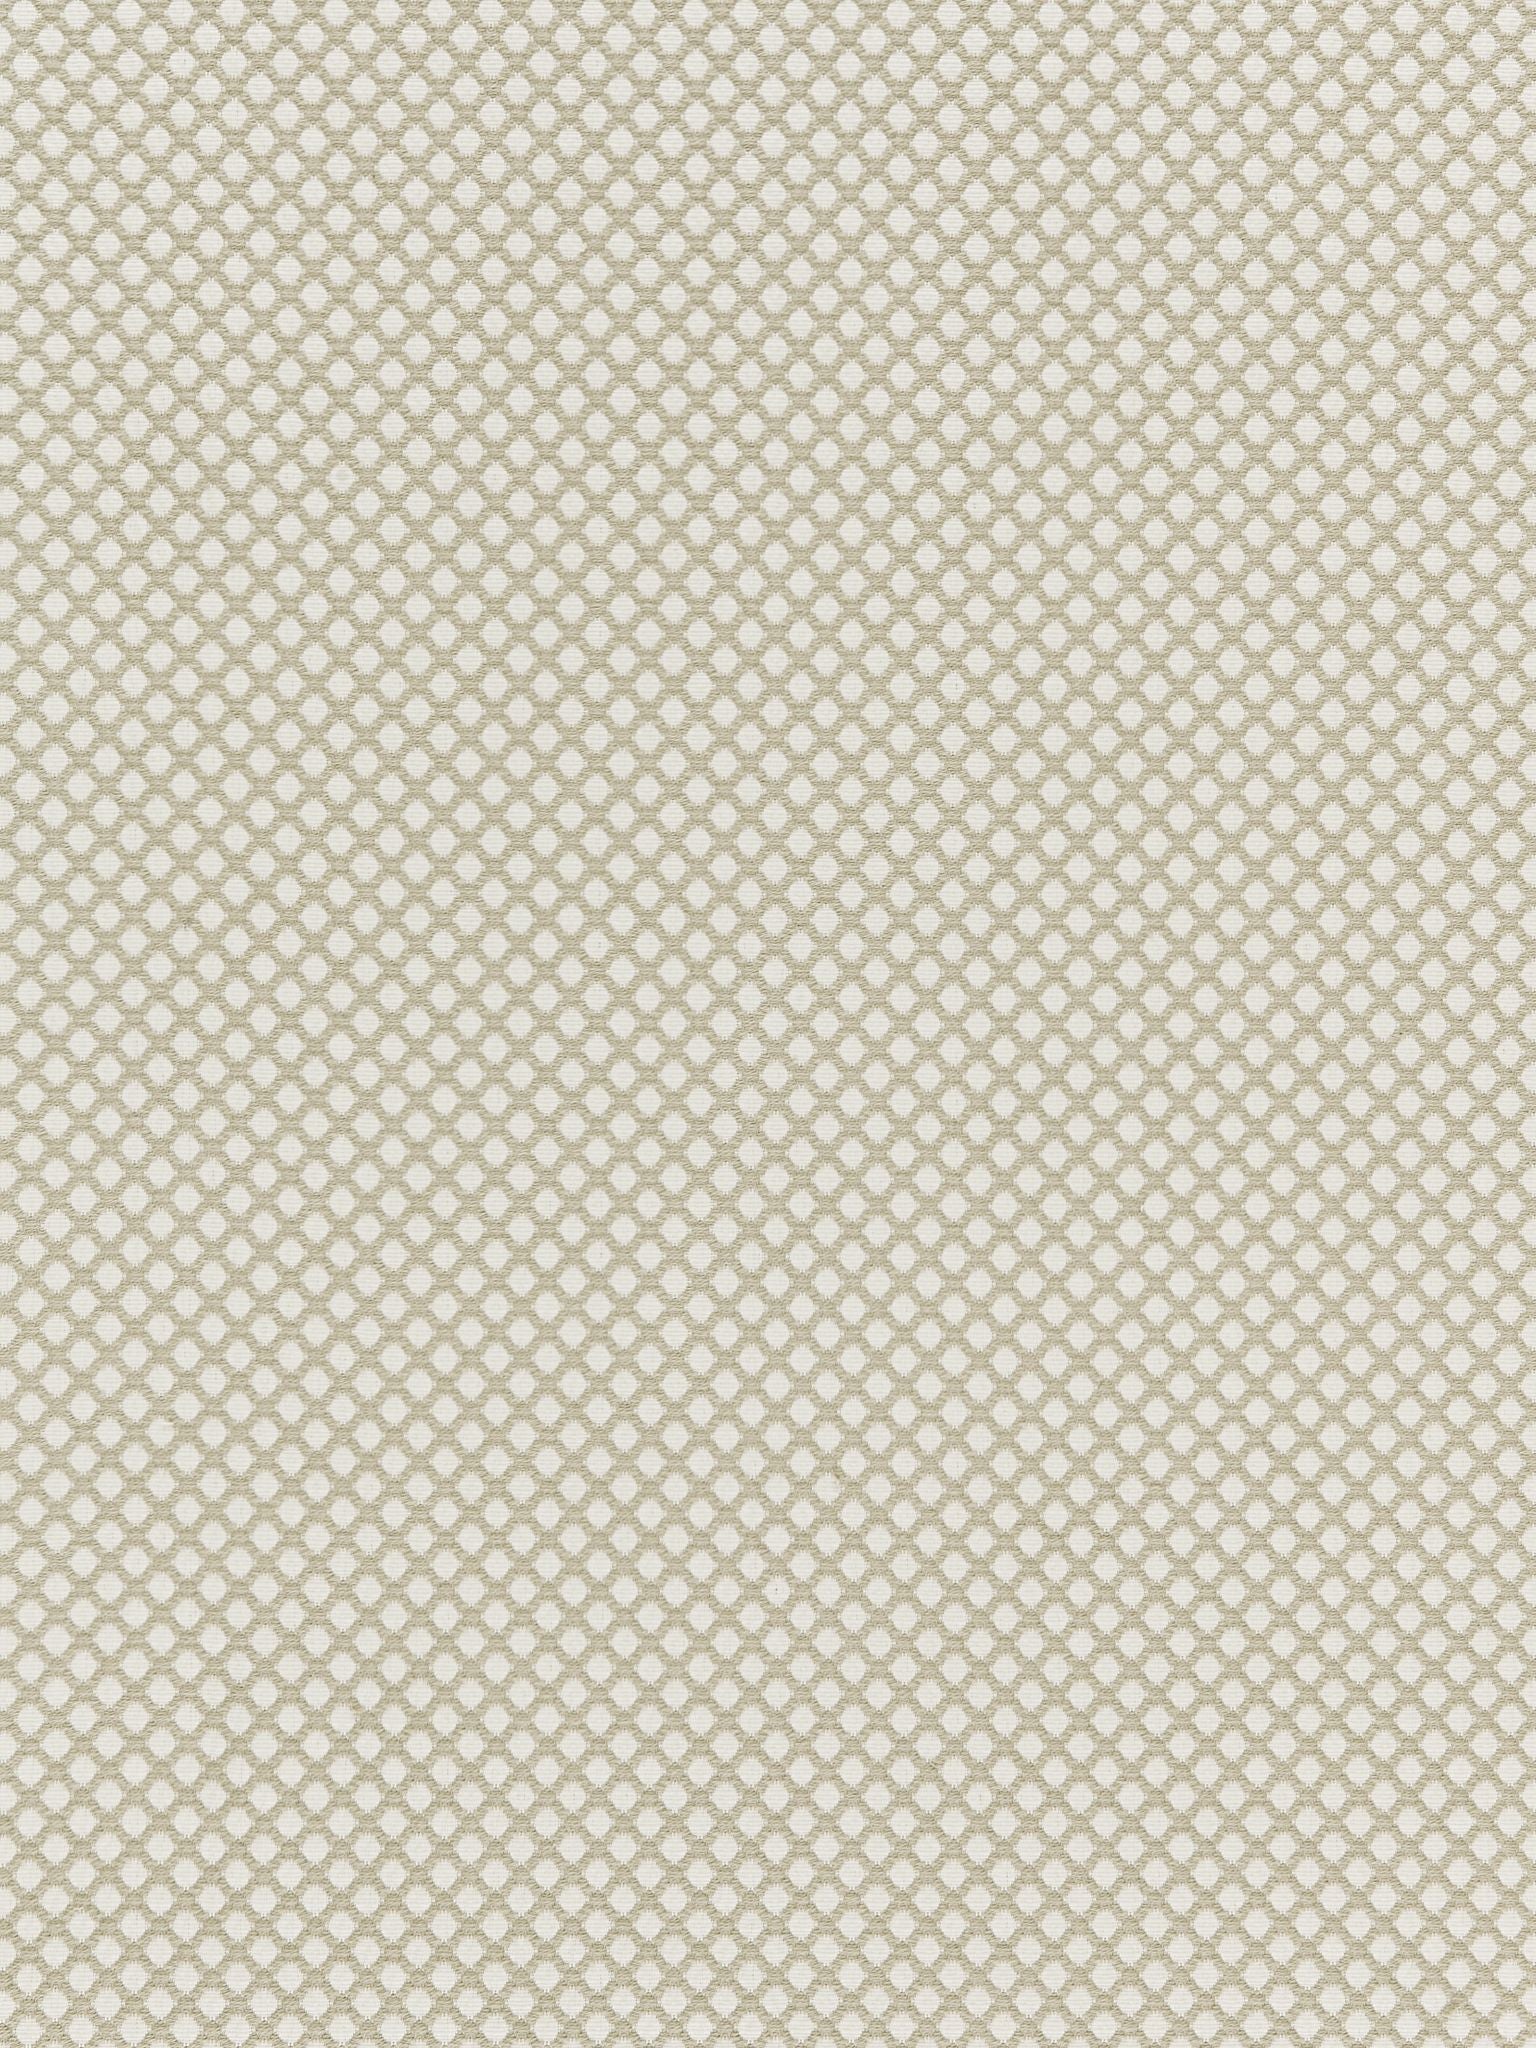 Bellaire Trellis fabric in flax color - pattern number BK 0001K65121 - by Scalamandre in the Old World Weavers collection